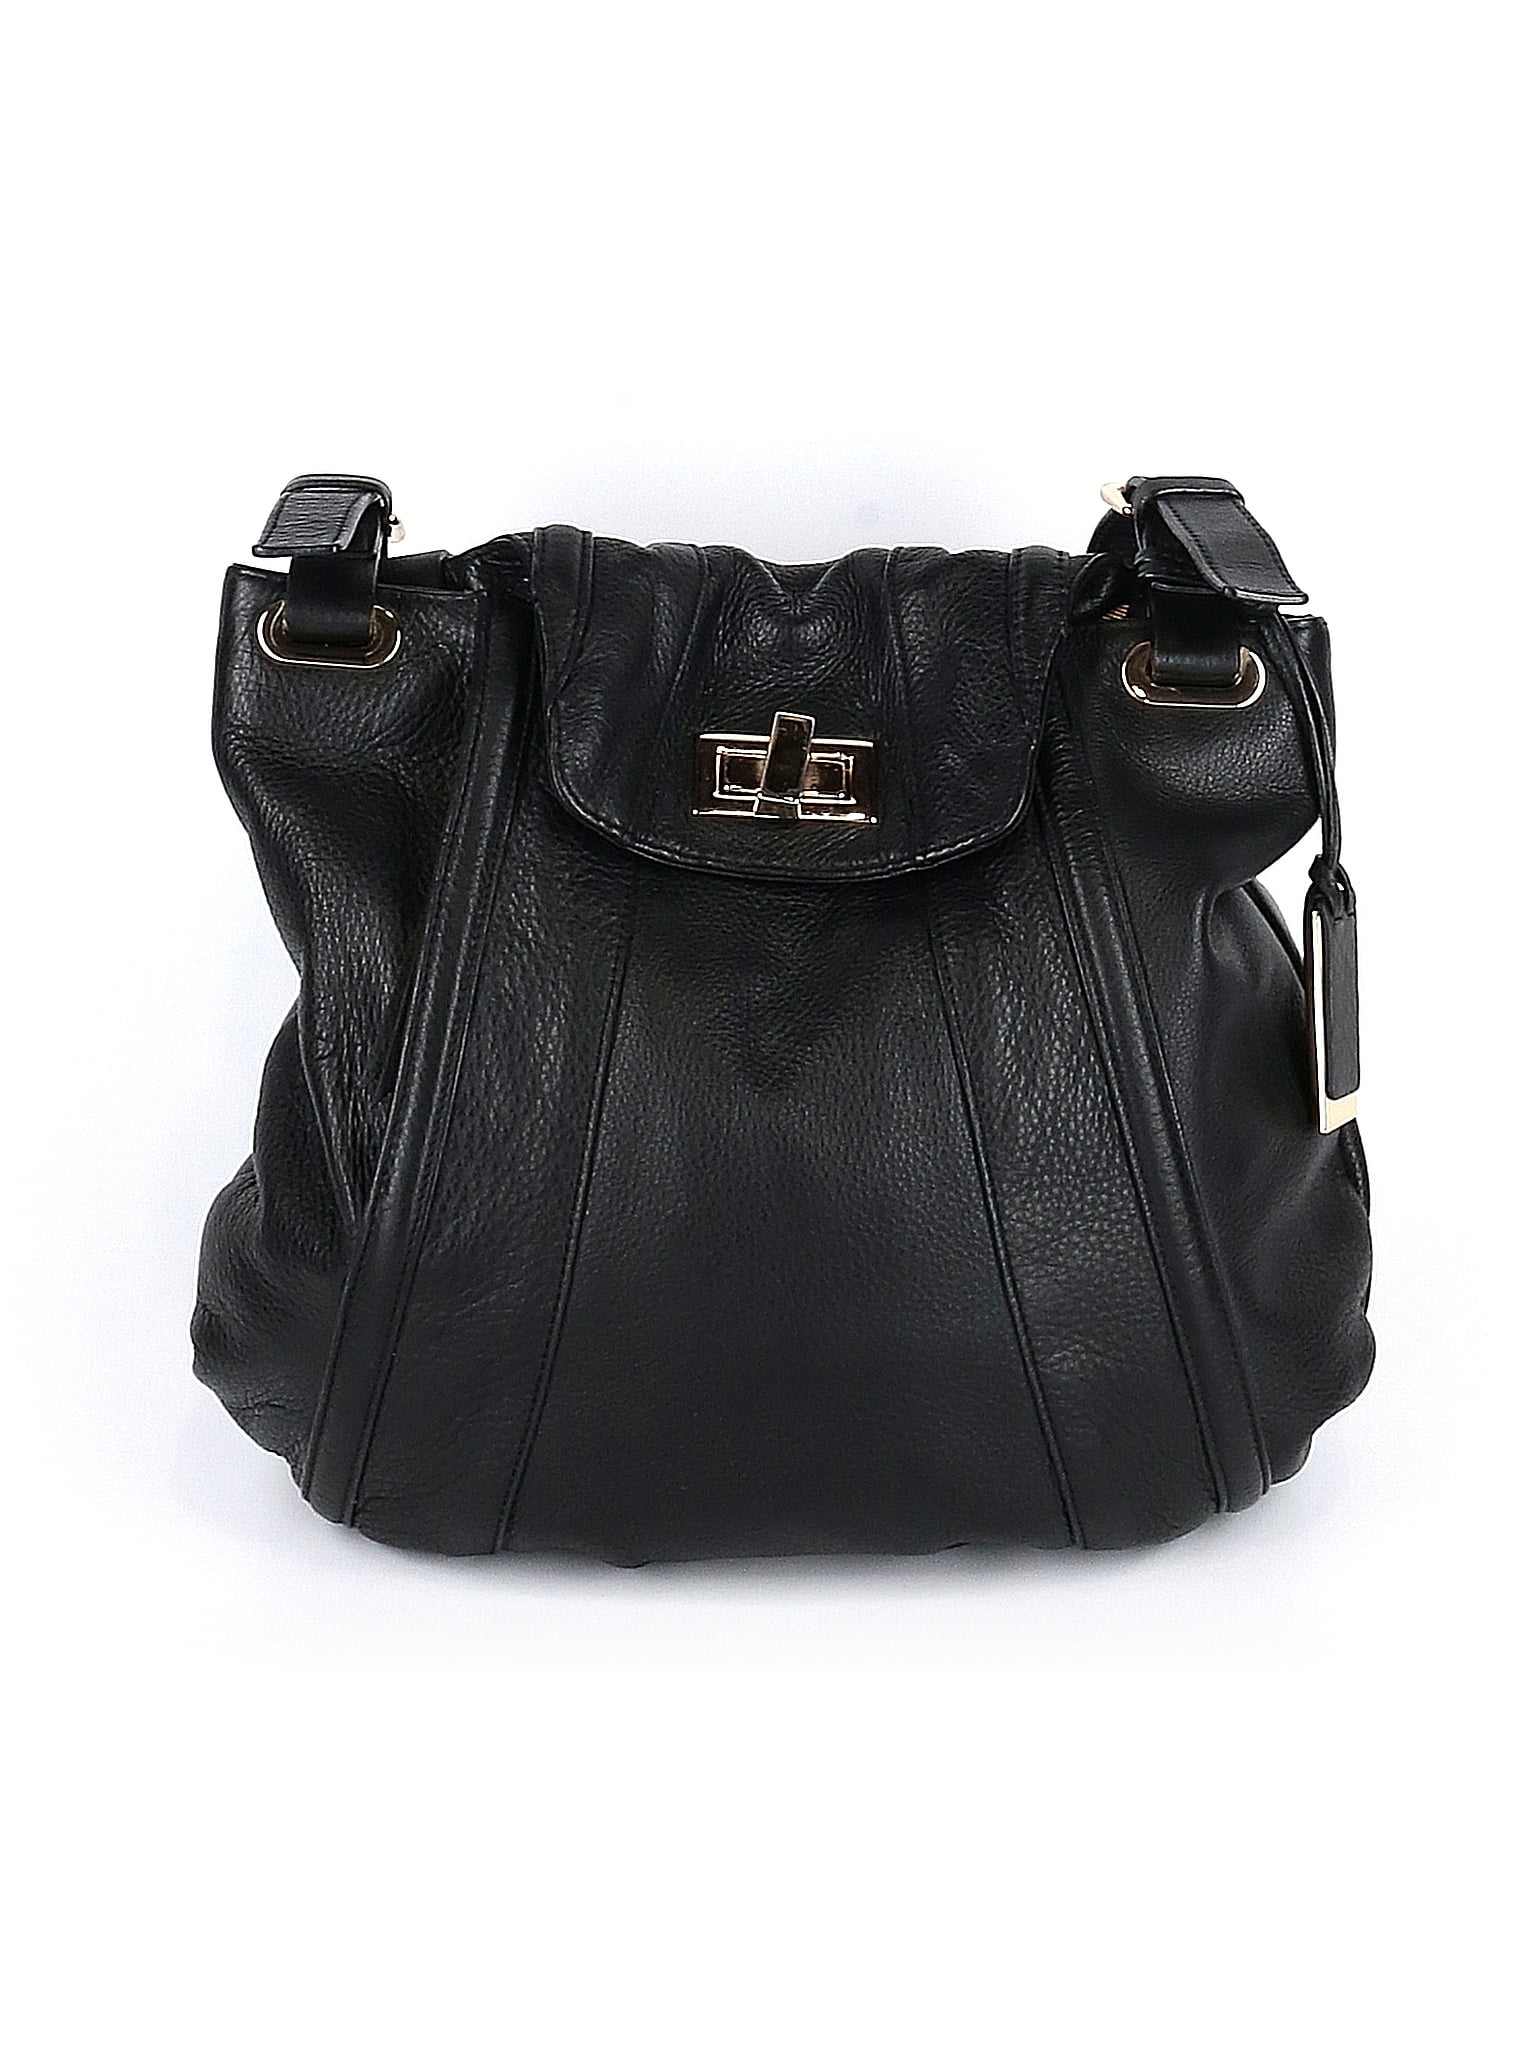 Pour La Victoire NWT Black Leather Bag - $243 New With Tags